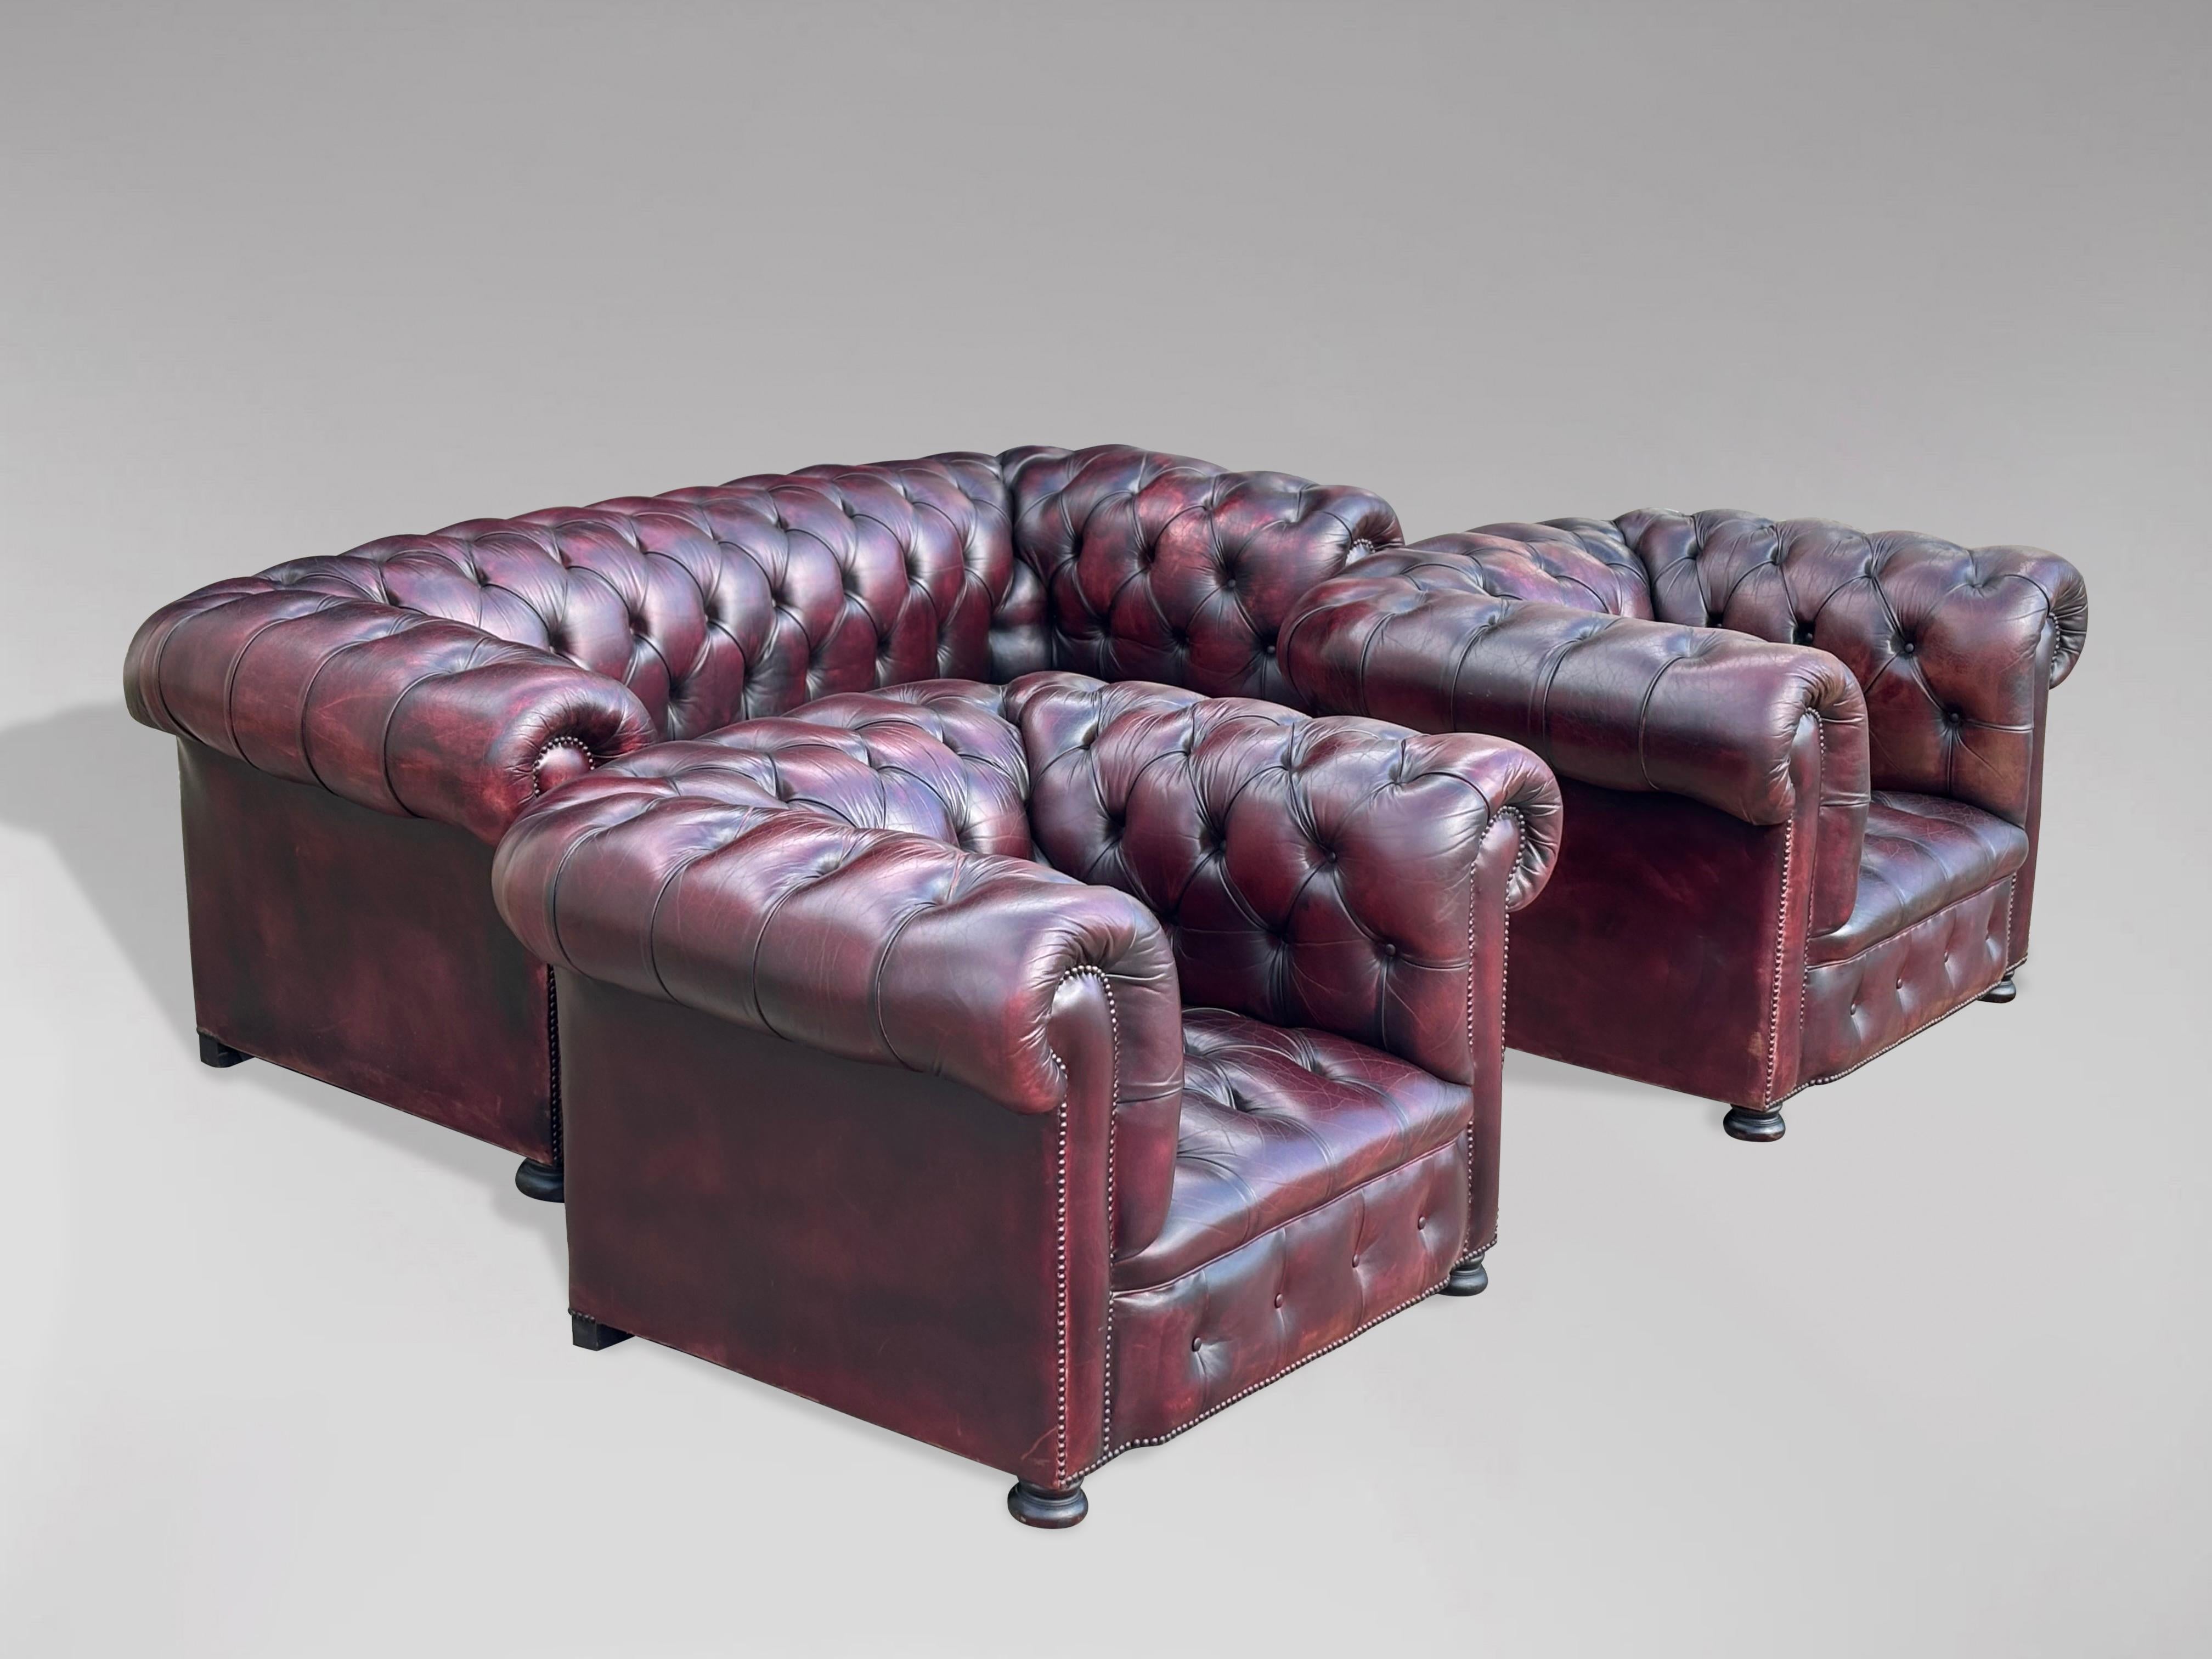 British Stunning Three Piece Burgundy Leather Chesterfield Suite For Sale